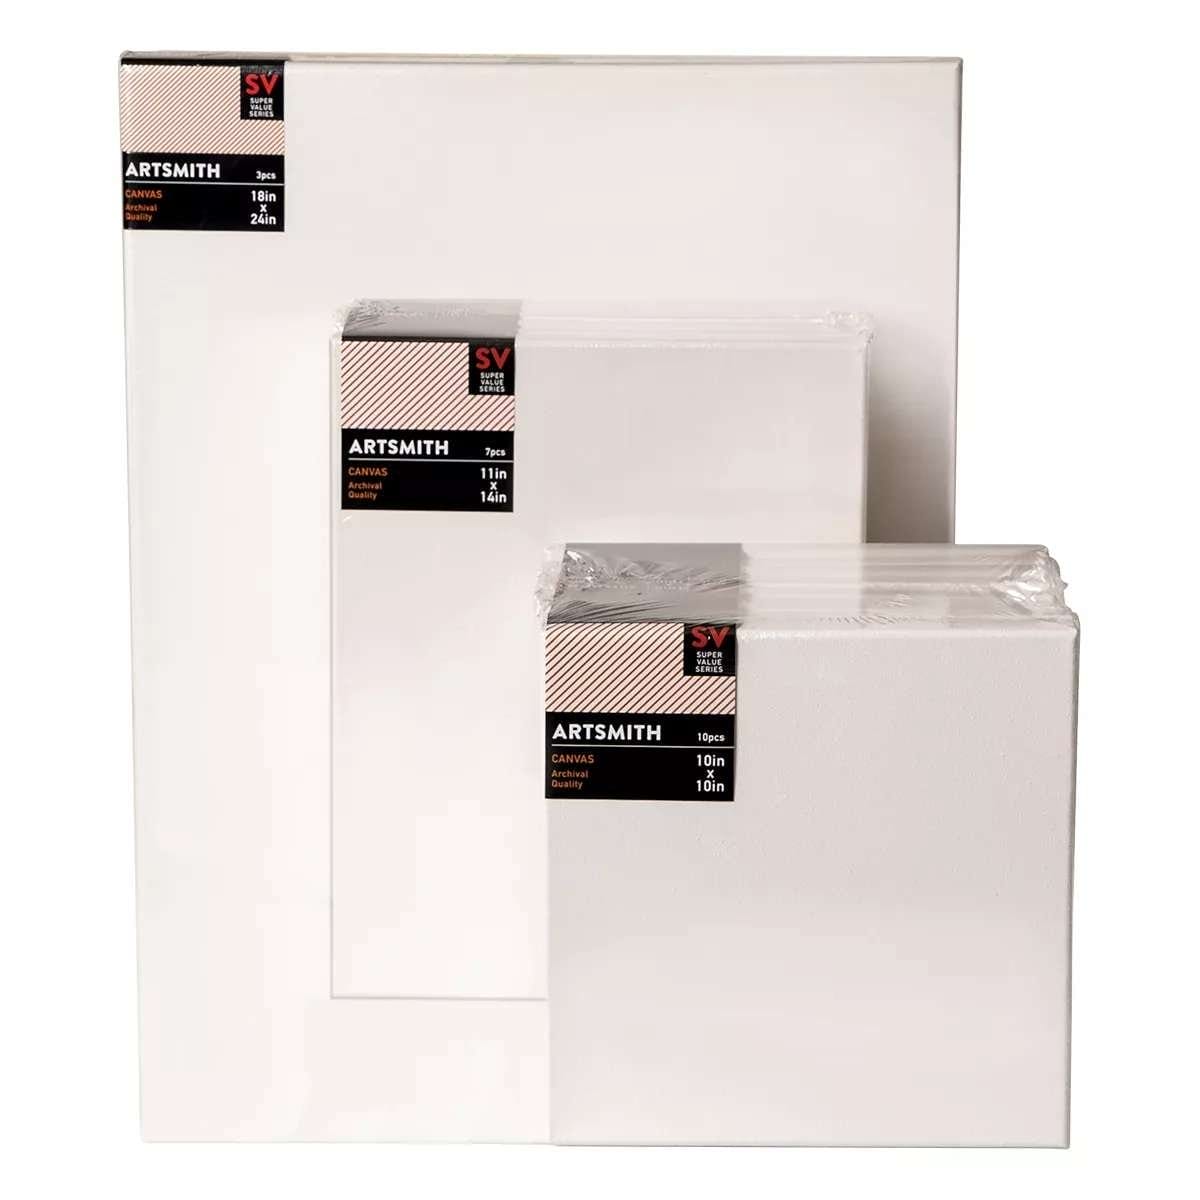 Artsmith Super Value Canvas Pack